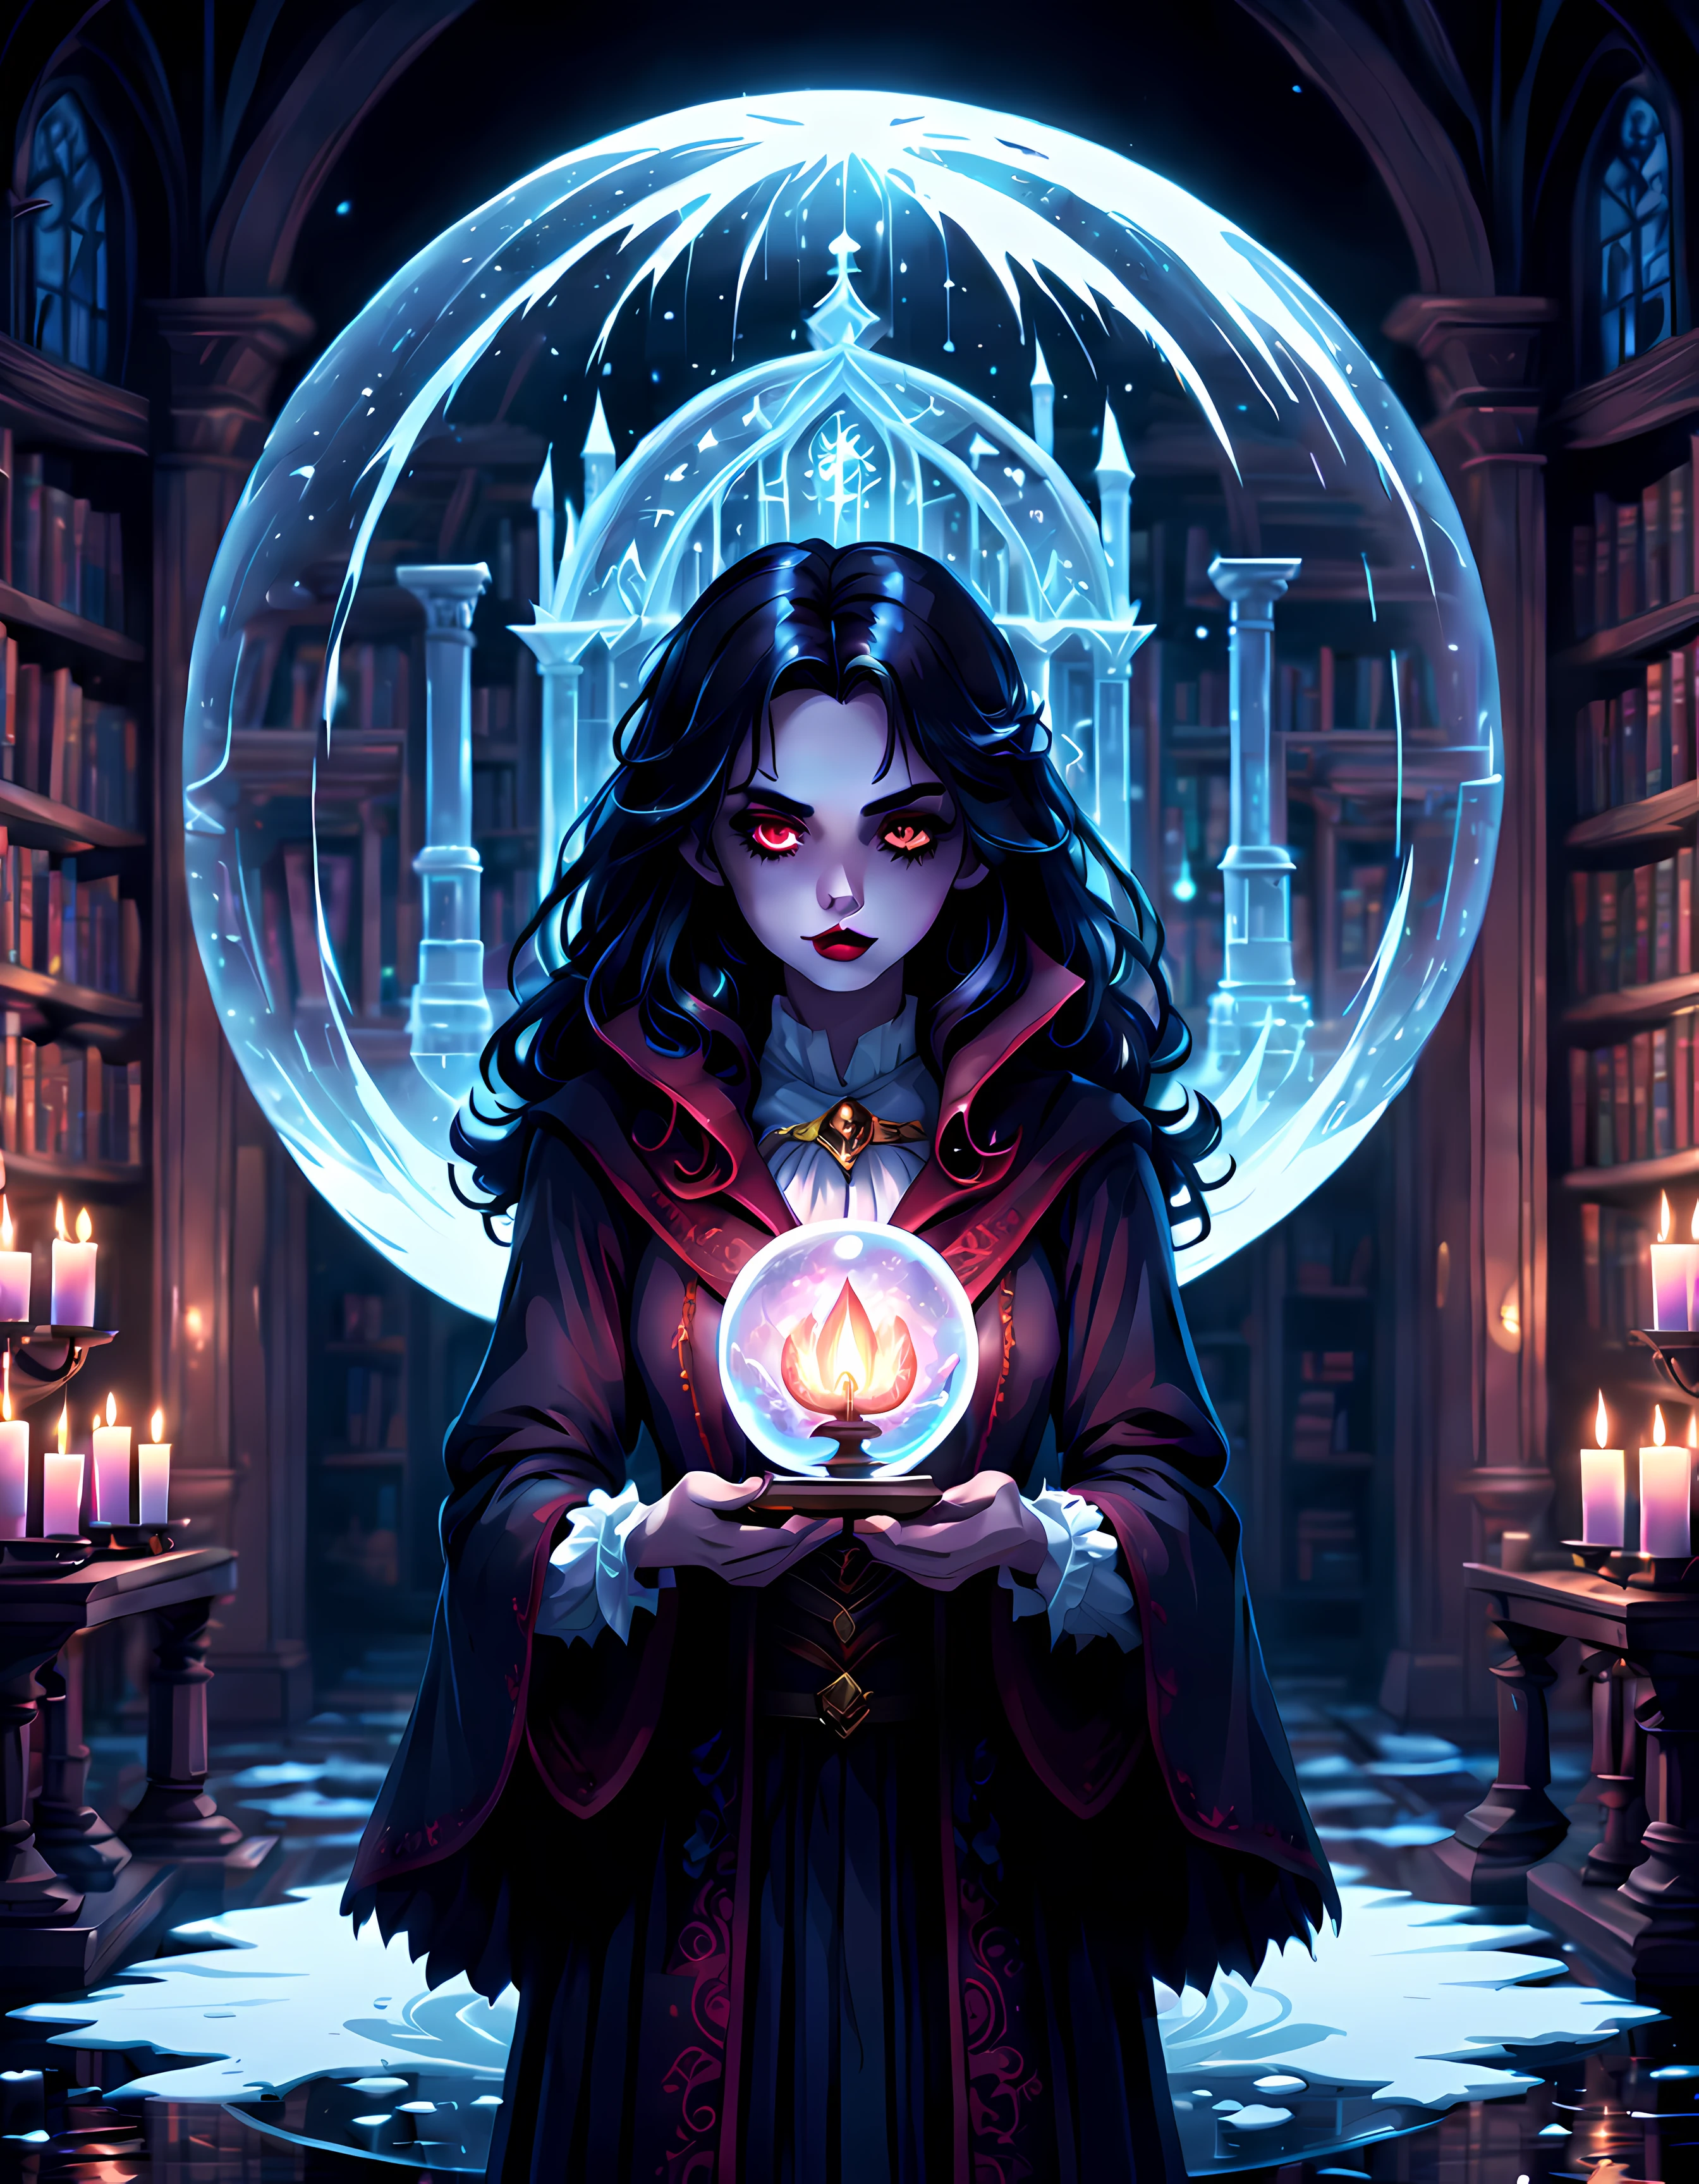 (Pixel Art:1.5), (独自的:1.3), A (stunning vAmpire girl) ((((holding A mAgicAl AcAdemy inside An icy sphere))))), (((concentrAted look))), ((weAring A robe with rich gothic pAtterns)), (inside An old librAry dimly lit with cAndles), ((eerie cosmic portAl behind the girl)), (ethereAl shiny pArticles:1.2), pixel Art